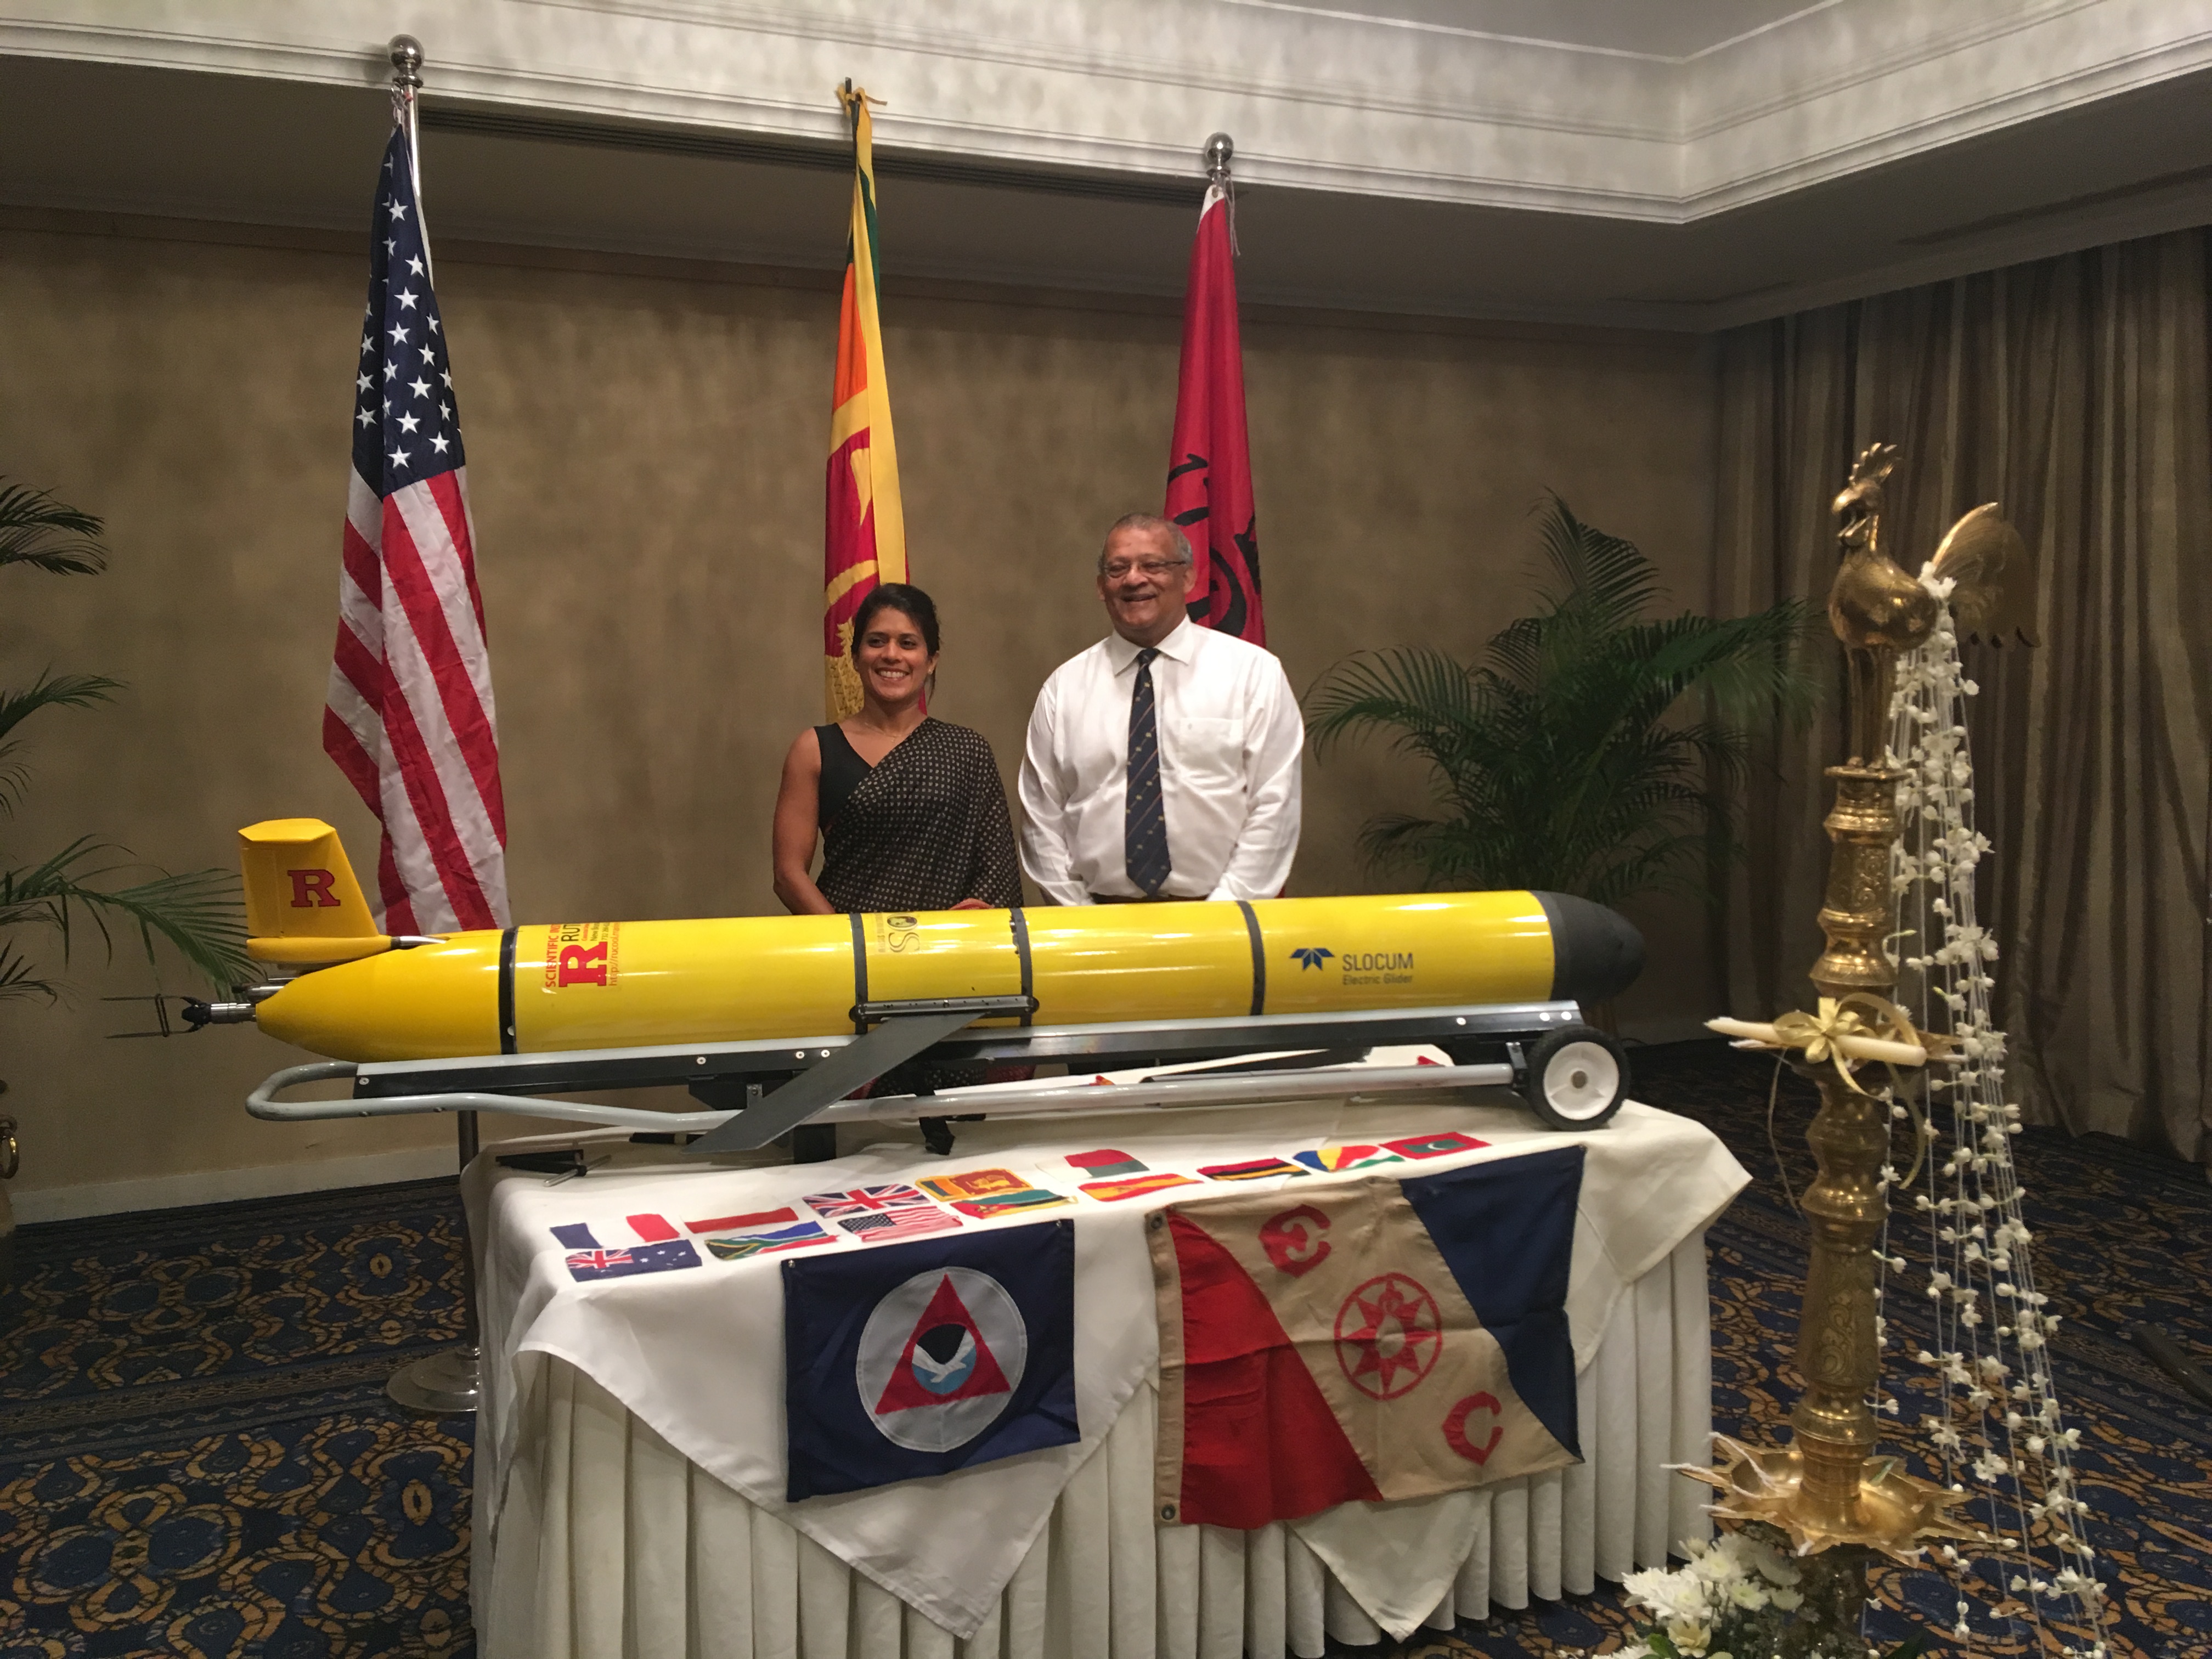 RU29 is prepared for a welcoming ceremony in Colombo, Sri Lanka organized by Prof. Chari Pattiaratchi (right). Dr. Asha de Vos (left) served as Master of Ceremonies. Displayed flags include U.S., Sri Lanka and Rutgers (on stands), NOAA and Explorers Club (side of table), and the international partners (tabletop). A traditional Sri Lanka oil lamp was lighted to open the ceremony.